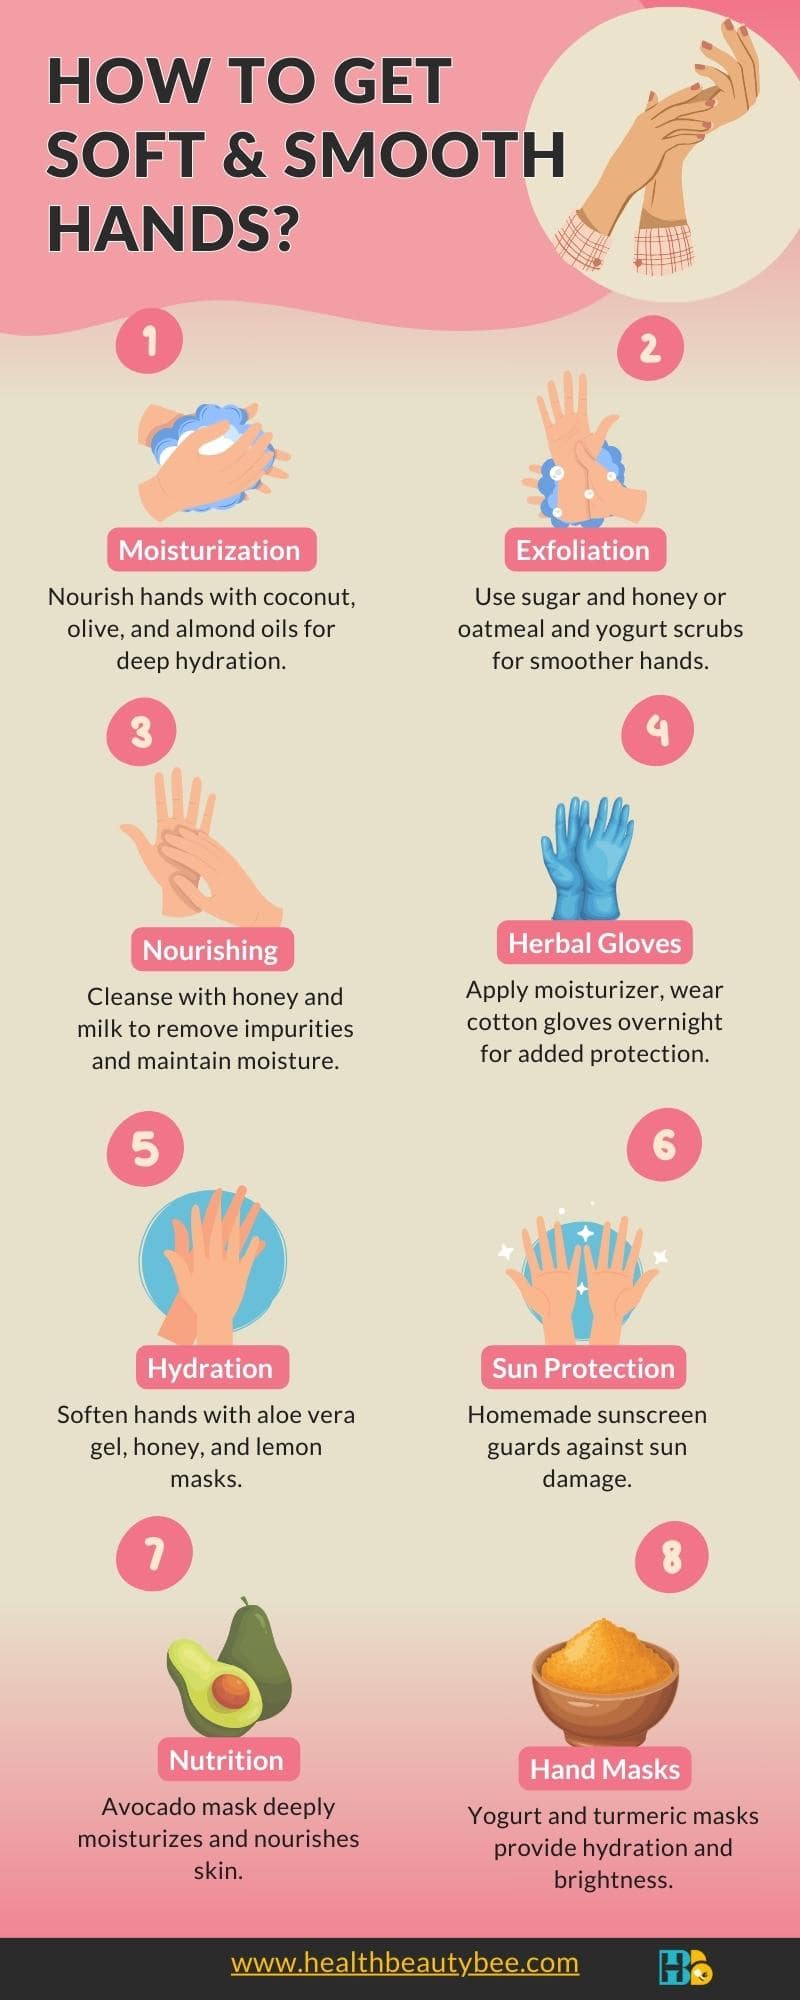 How to Get Soft and Smooth Hands infographic healthbeautybee